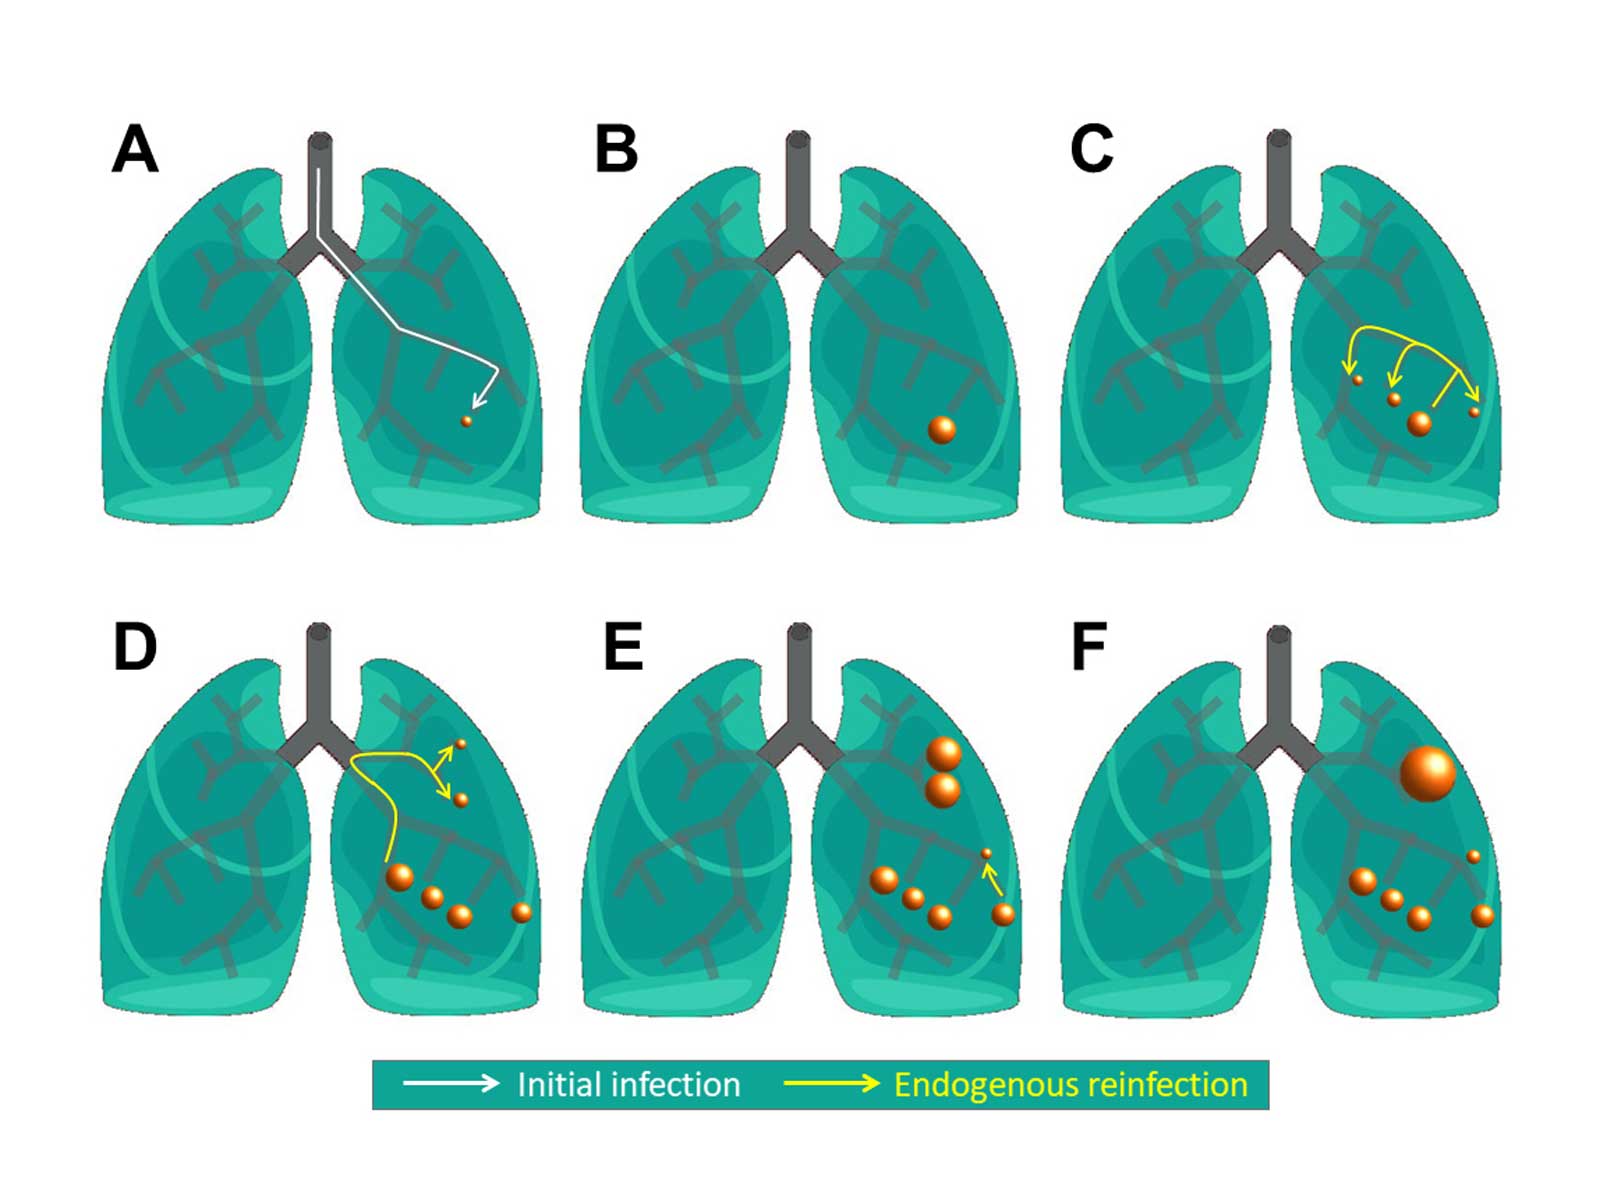 Virtual lungs to understand the dynamics of tuberculosis lesions within the lungs